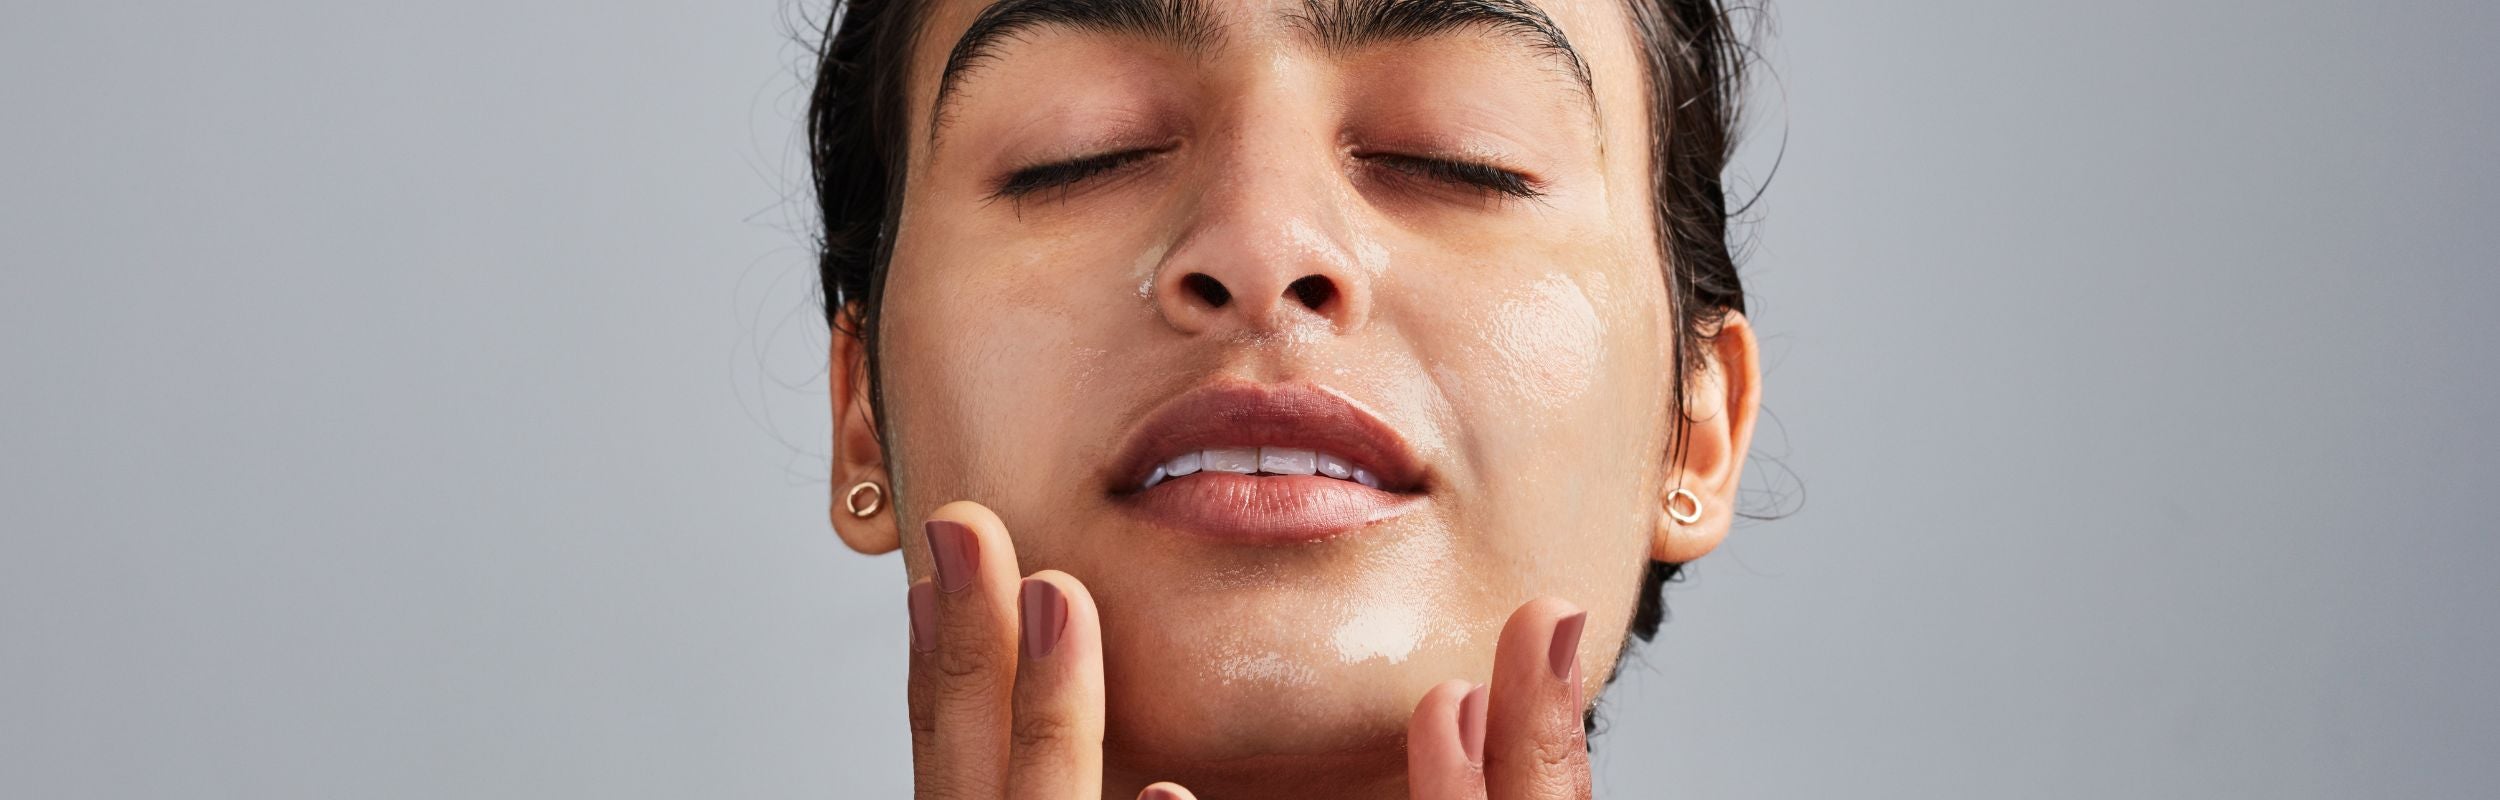 Hydration Or Moisturisation - What Does Your Skin Need?